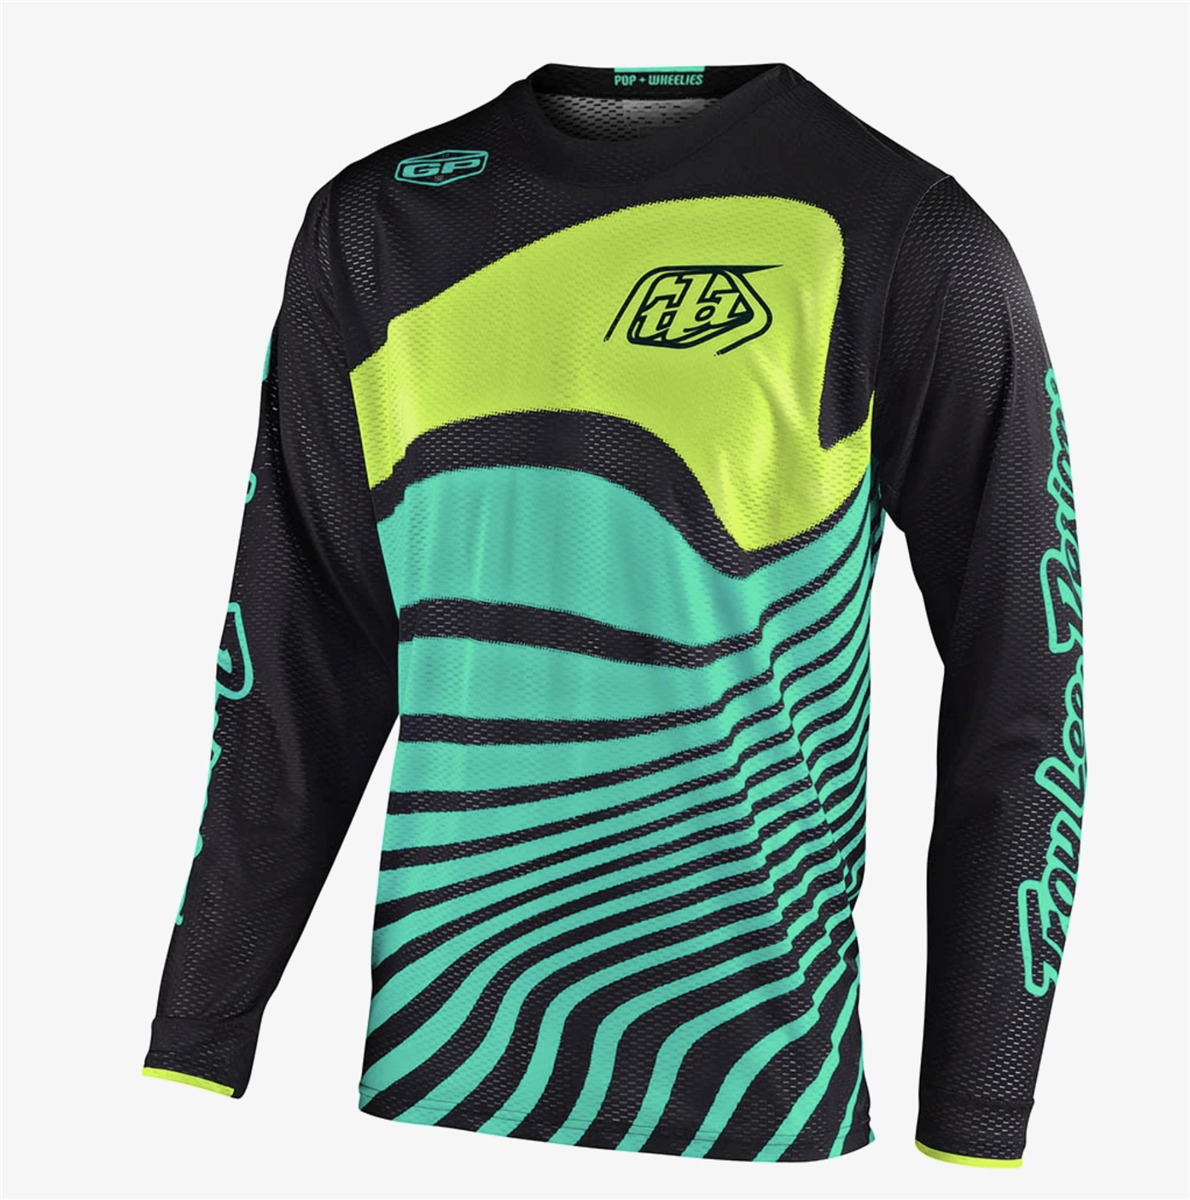 YOUTH TROY LEE DESIGNS GP AIR JERSEY - DRIFT